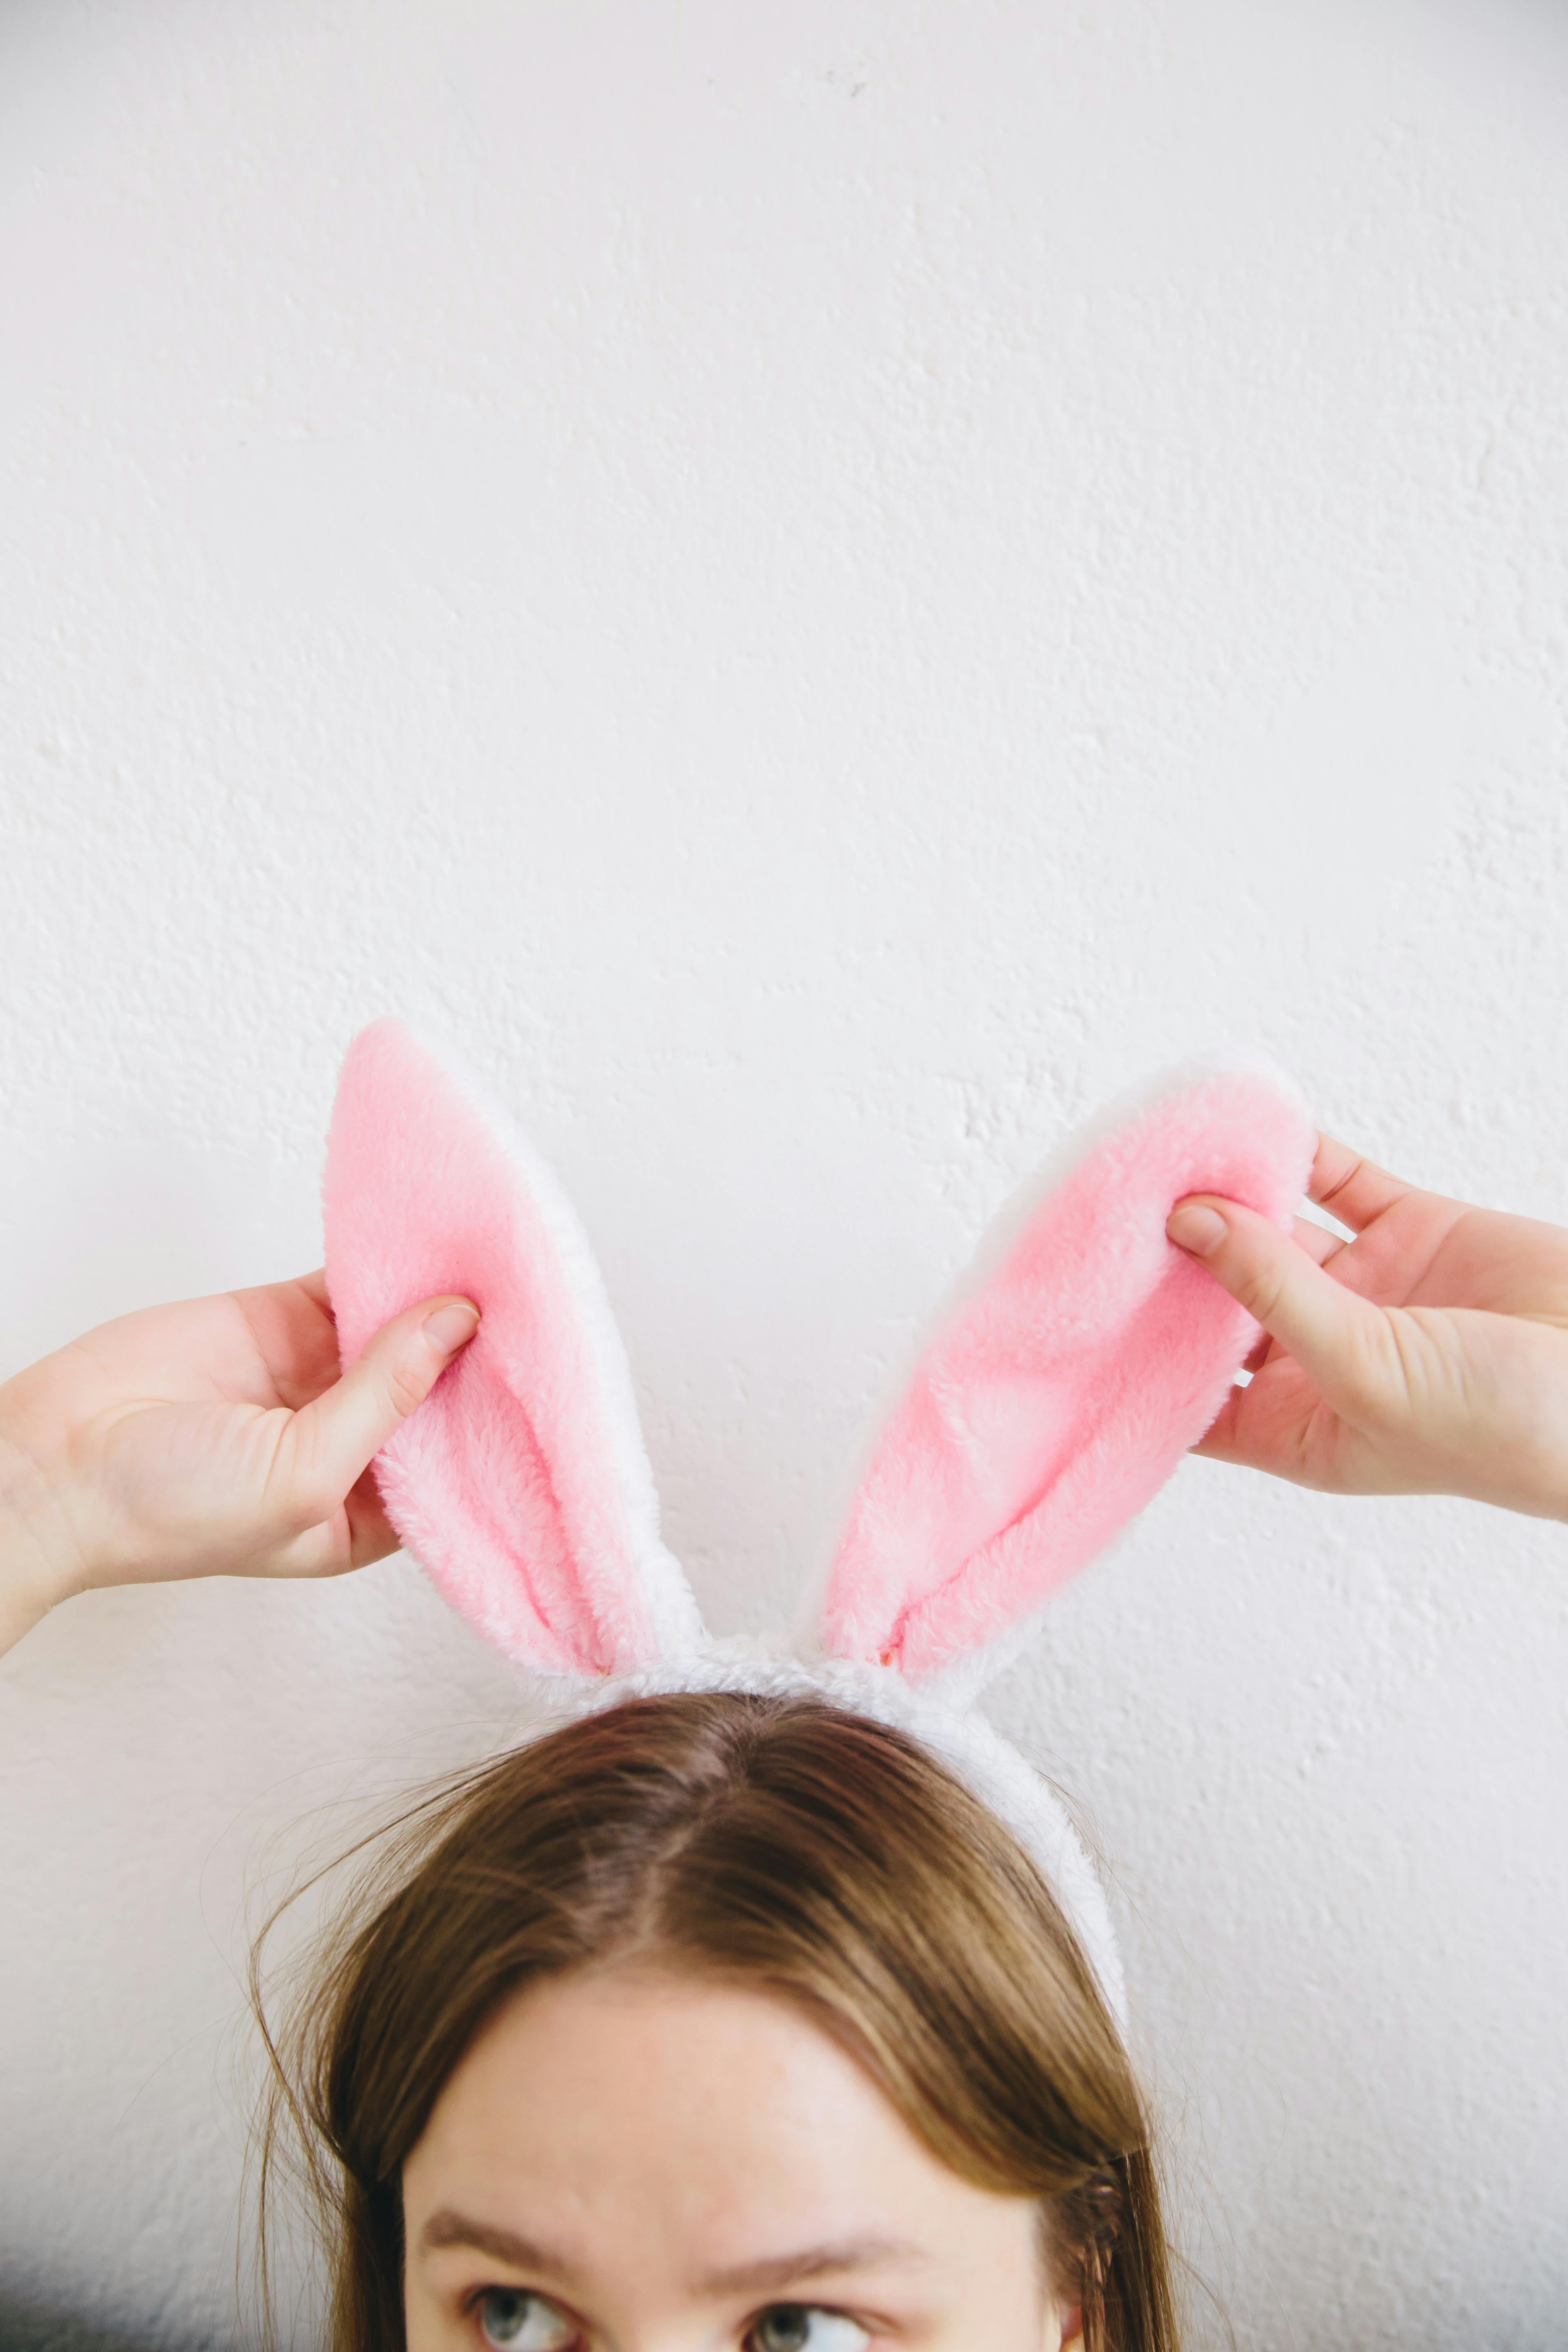 Person With Bunny Ears · Free Stock Photo